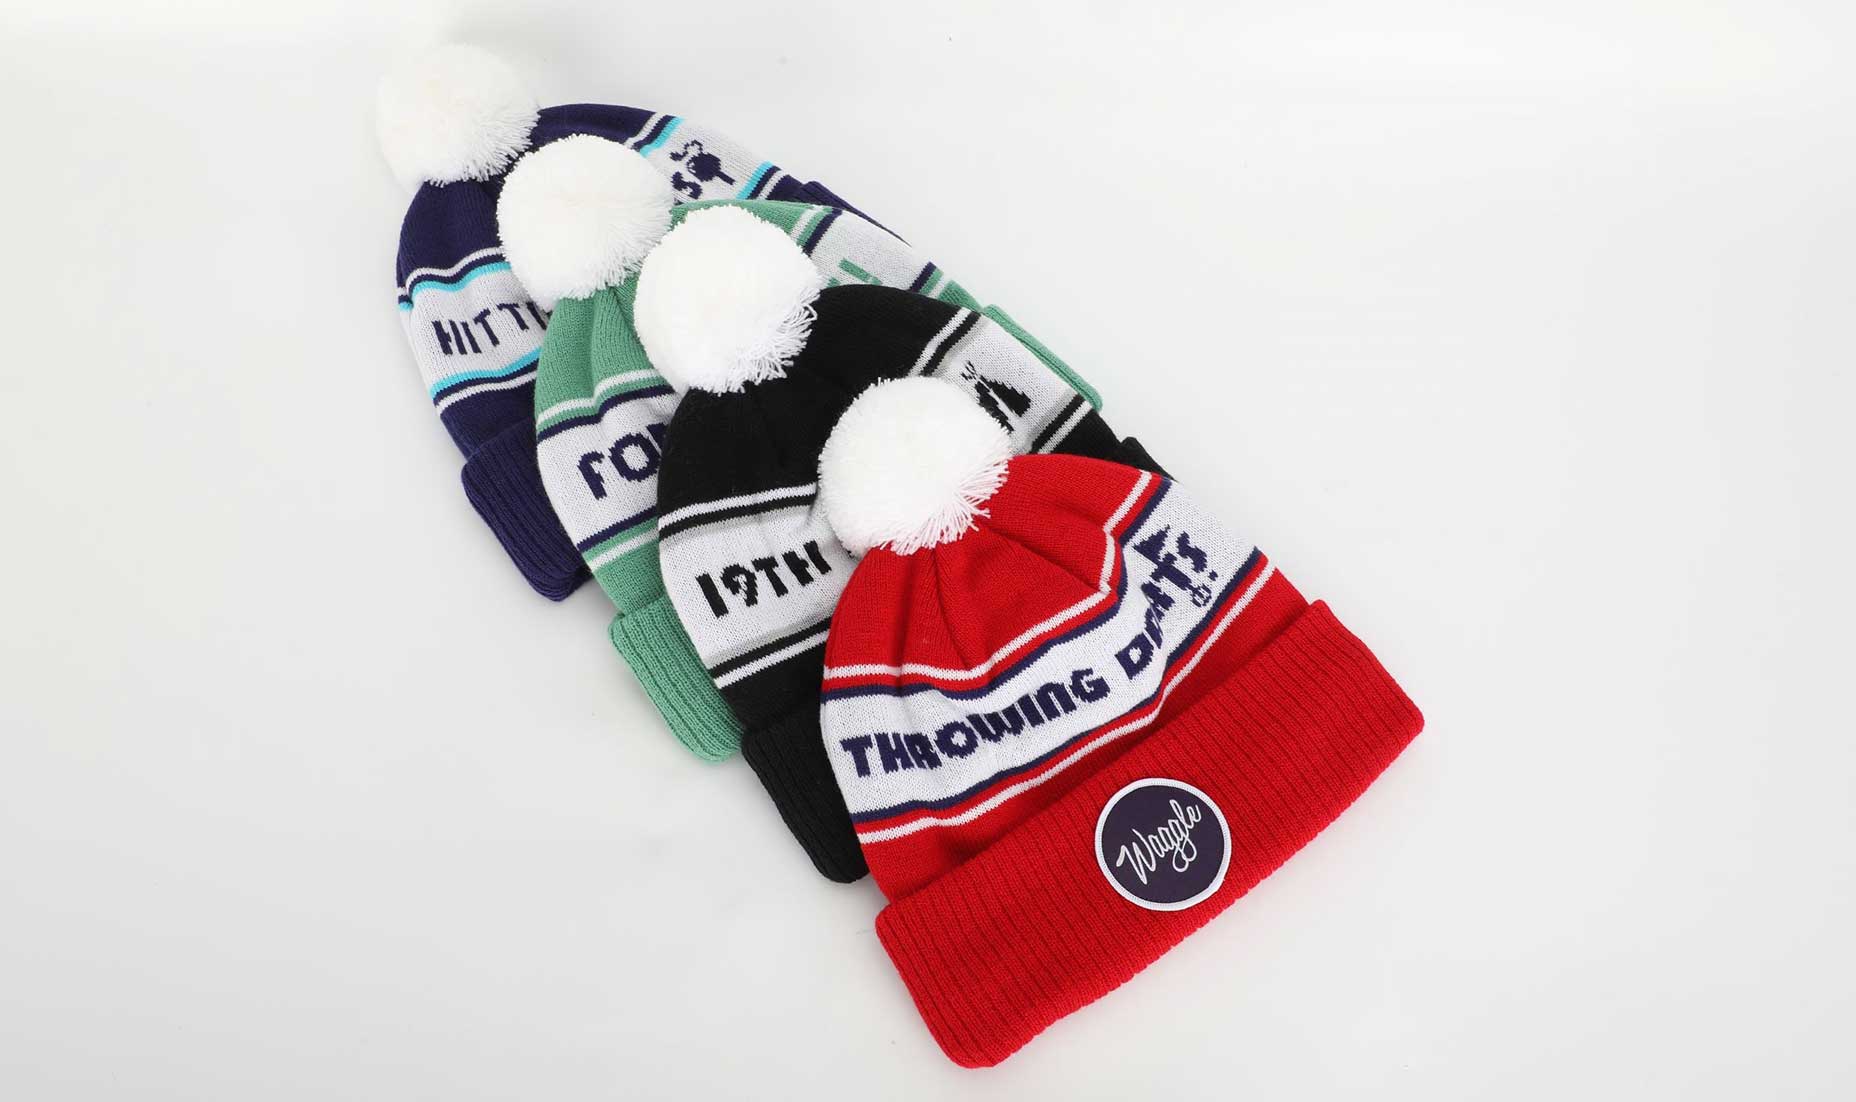 Best golf gifts: 11 stocking stuffers perfect for every golfer in your life